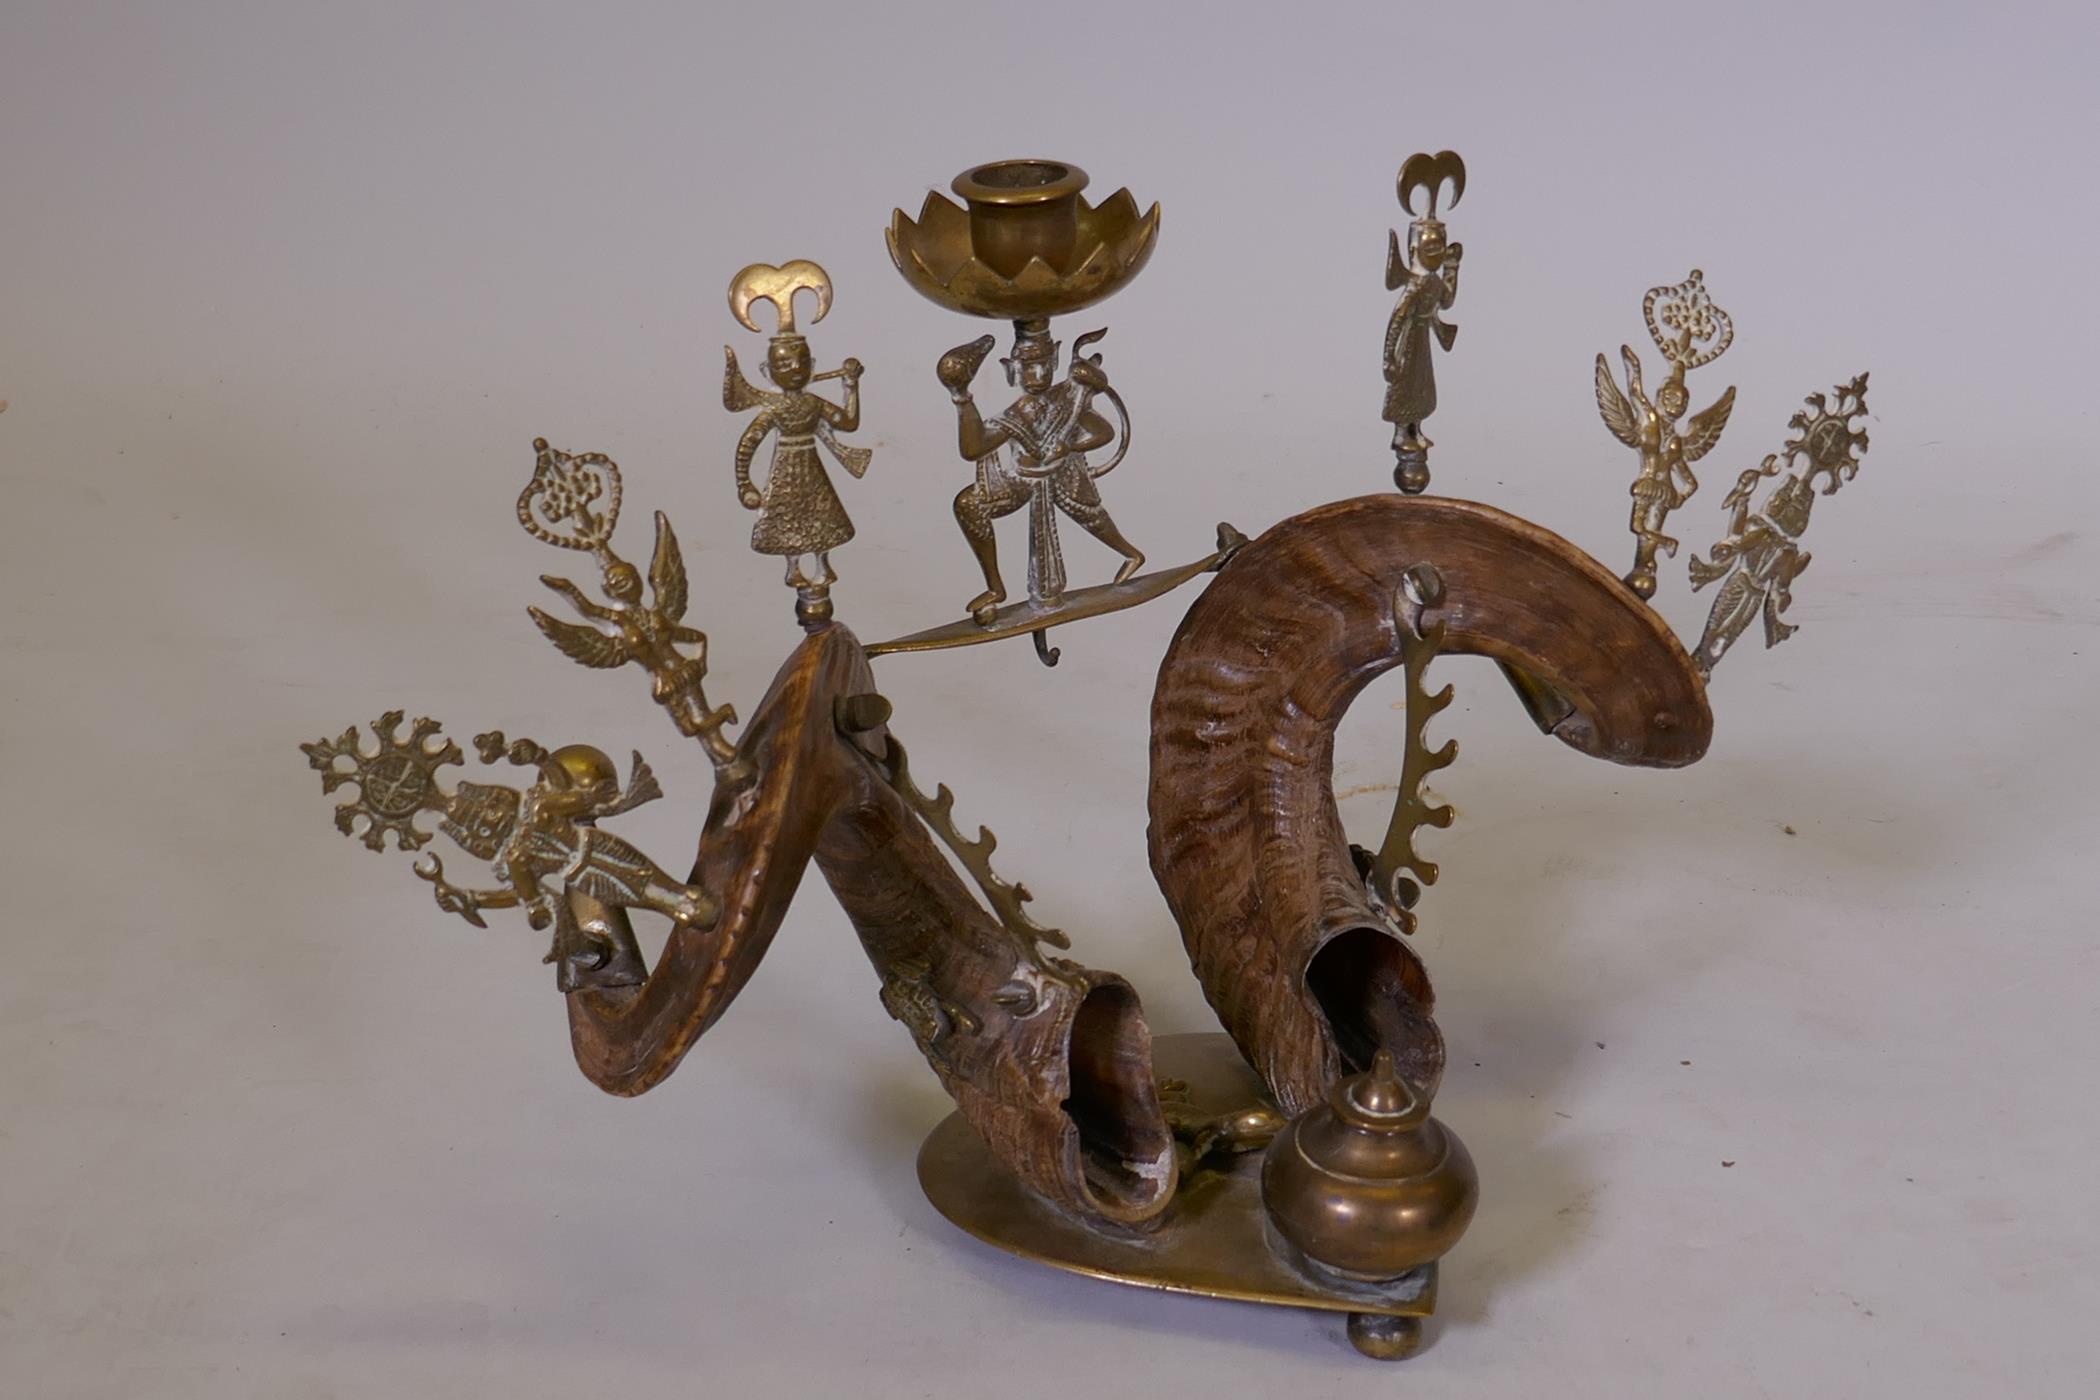 Antique Anglo Indian desk stand with inkwell and ram's horn decoration, with brass mounts, 9" high - Image 2 of 4